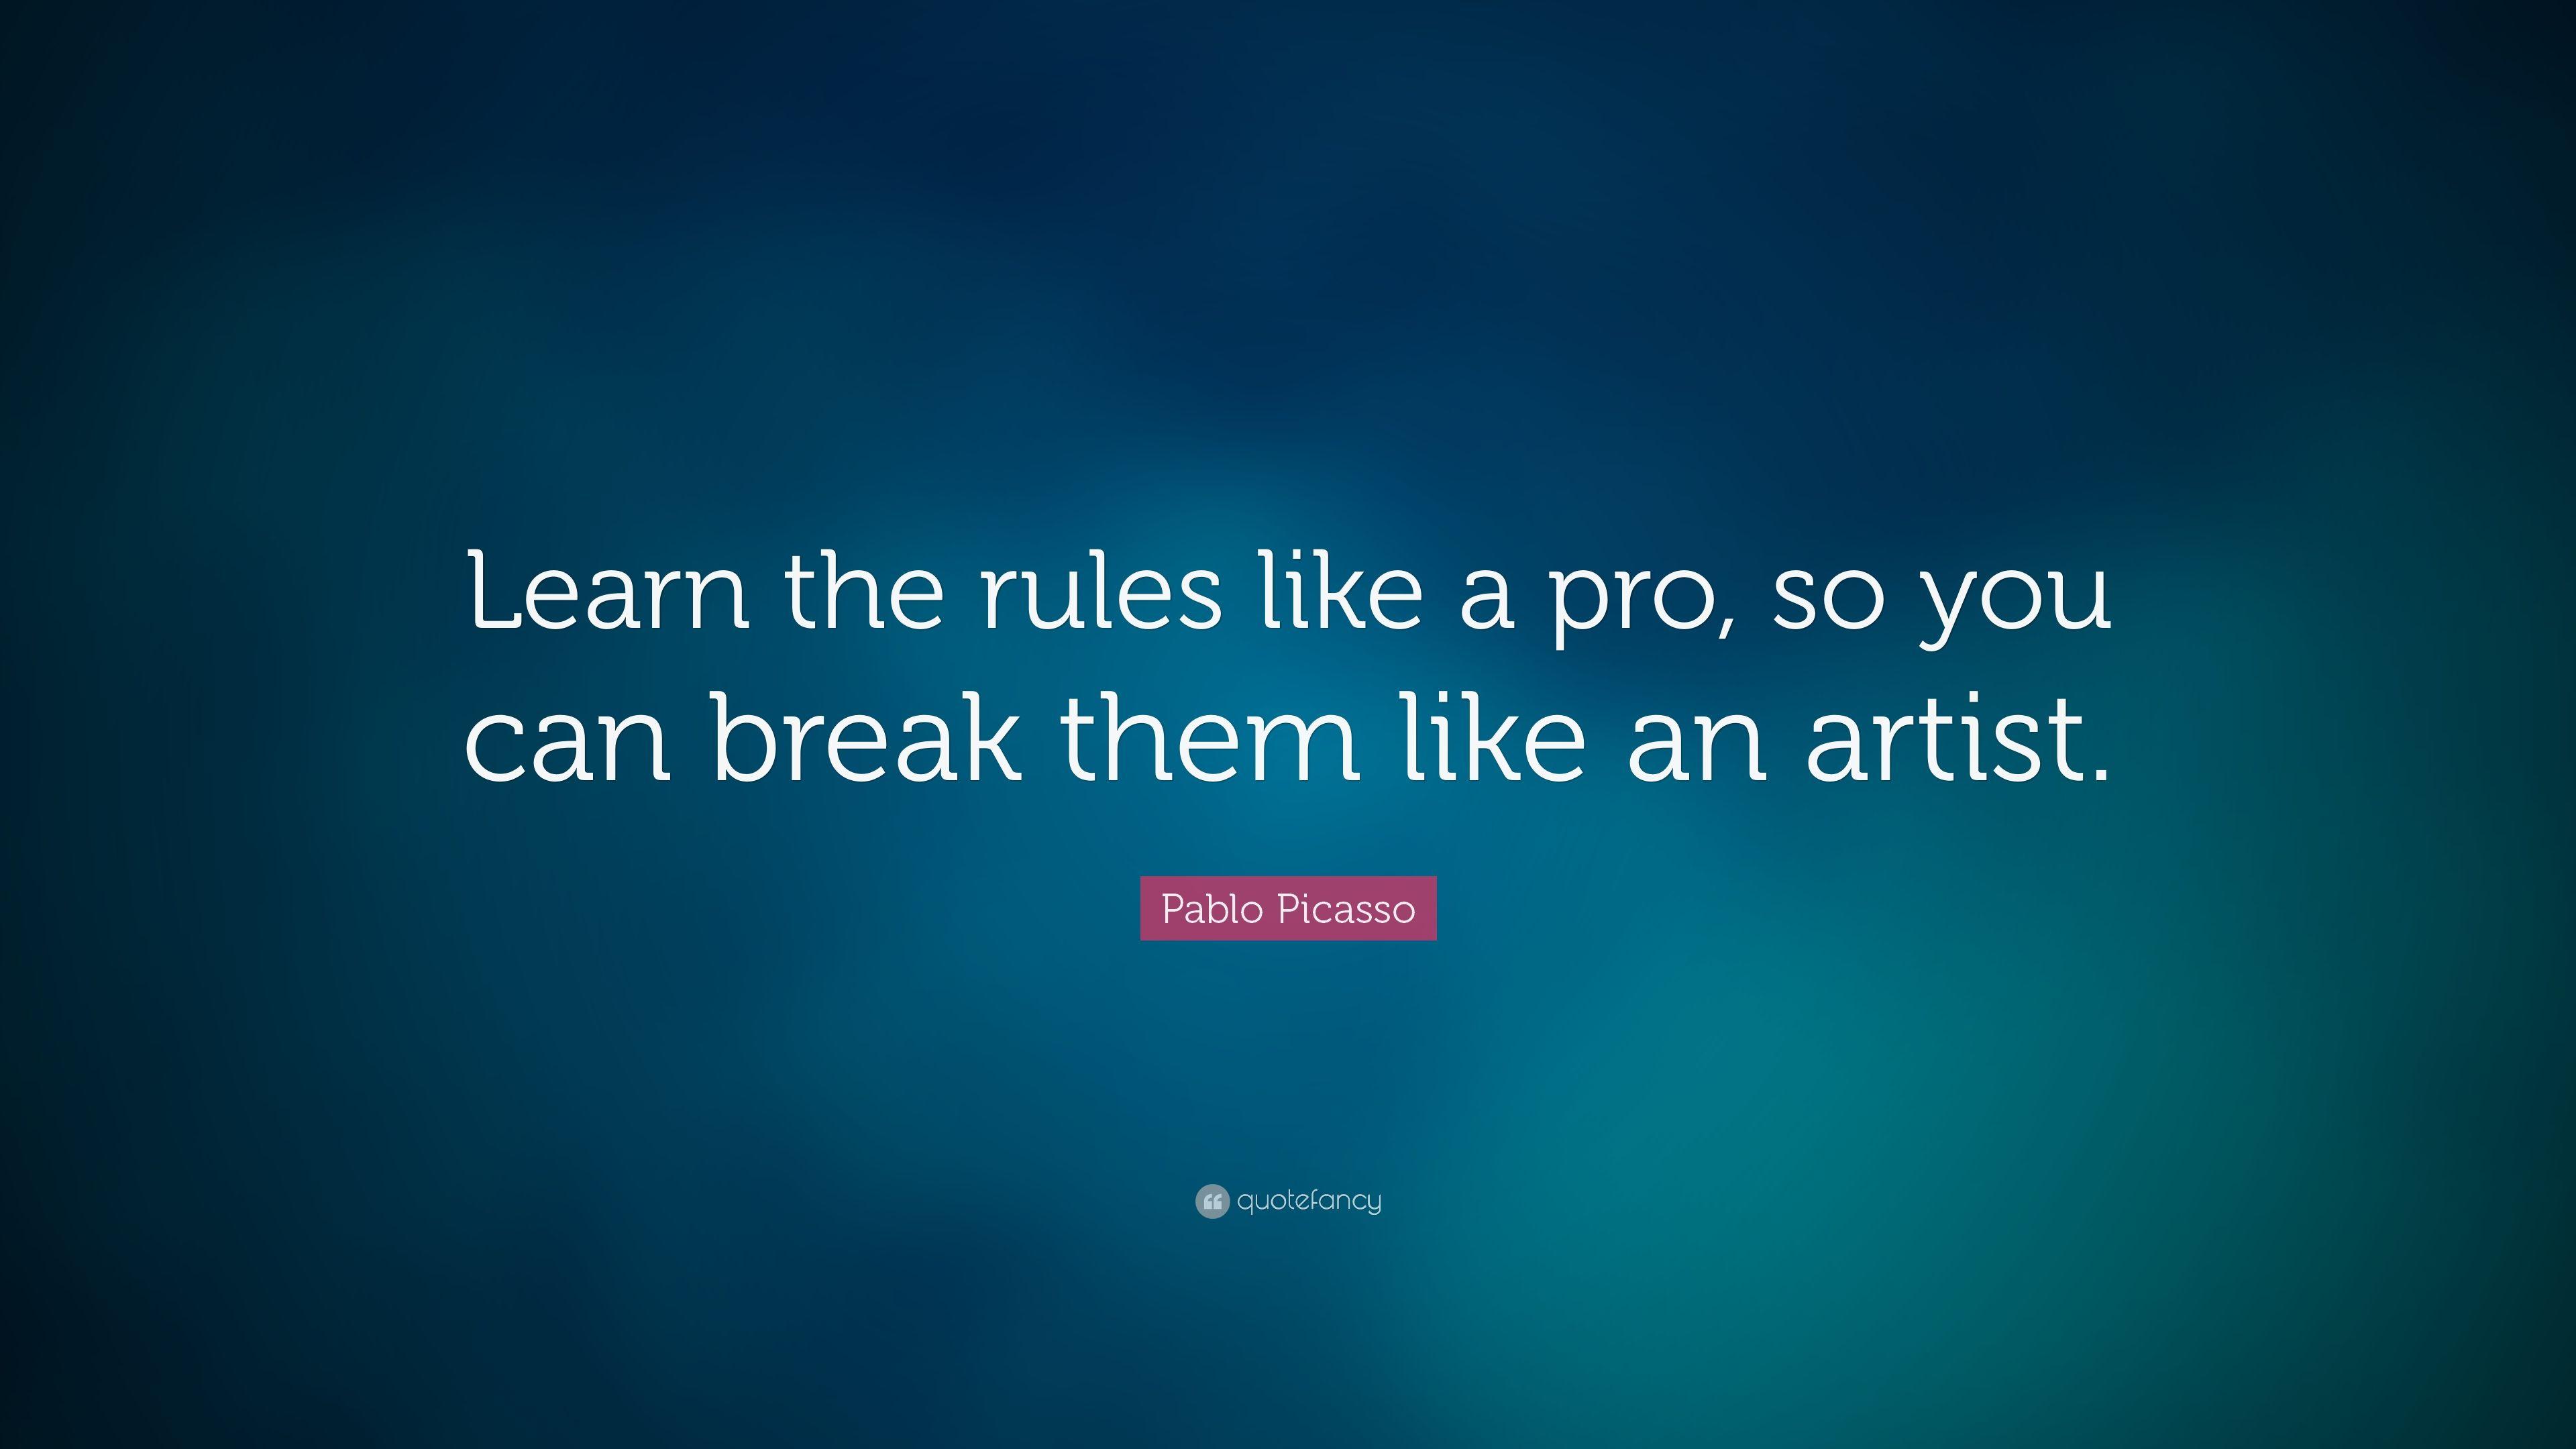 Pablo Picasso Quote: “Learn the rules like a pro, so you can break